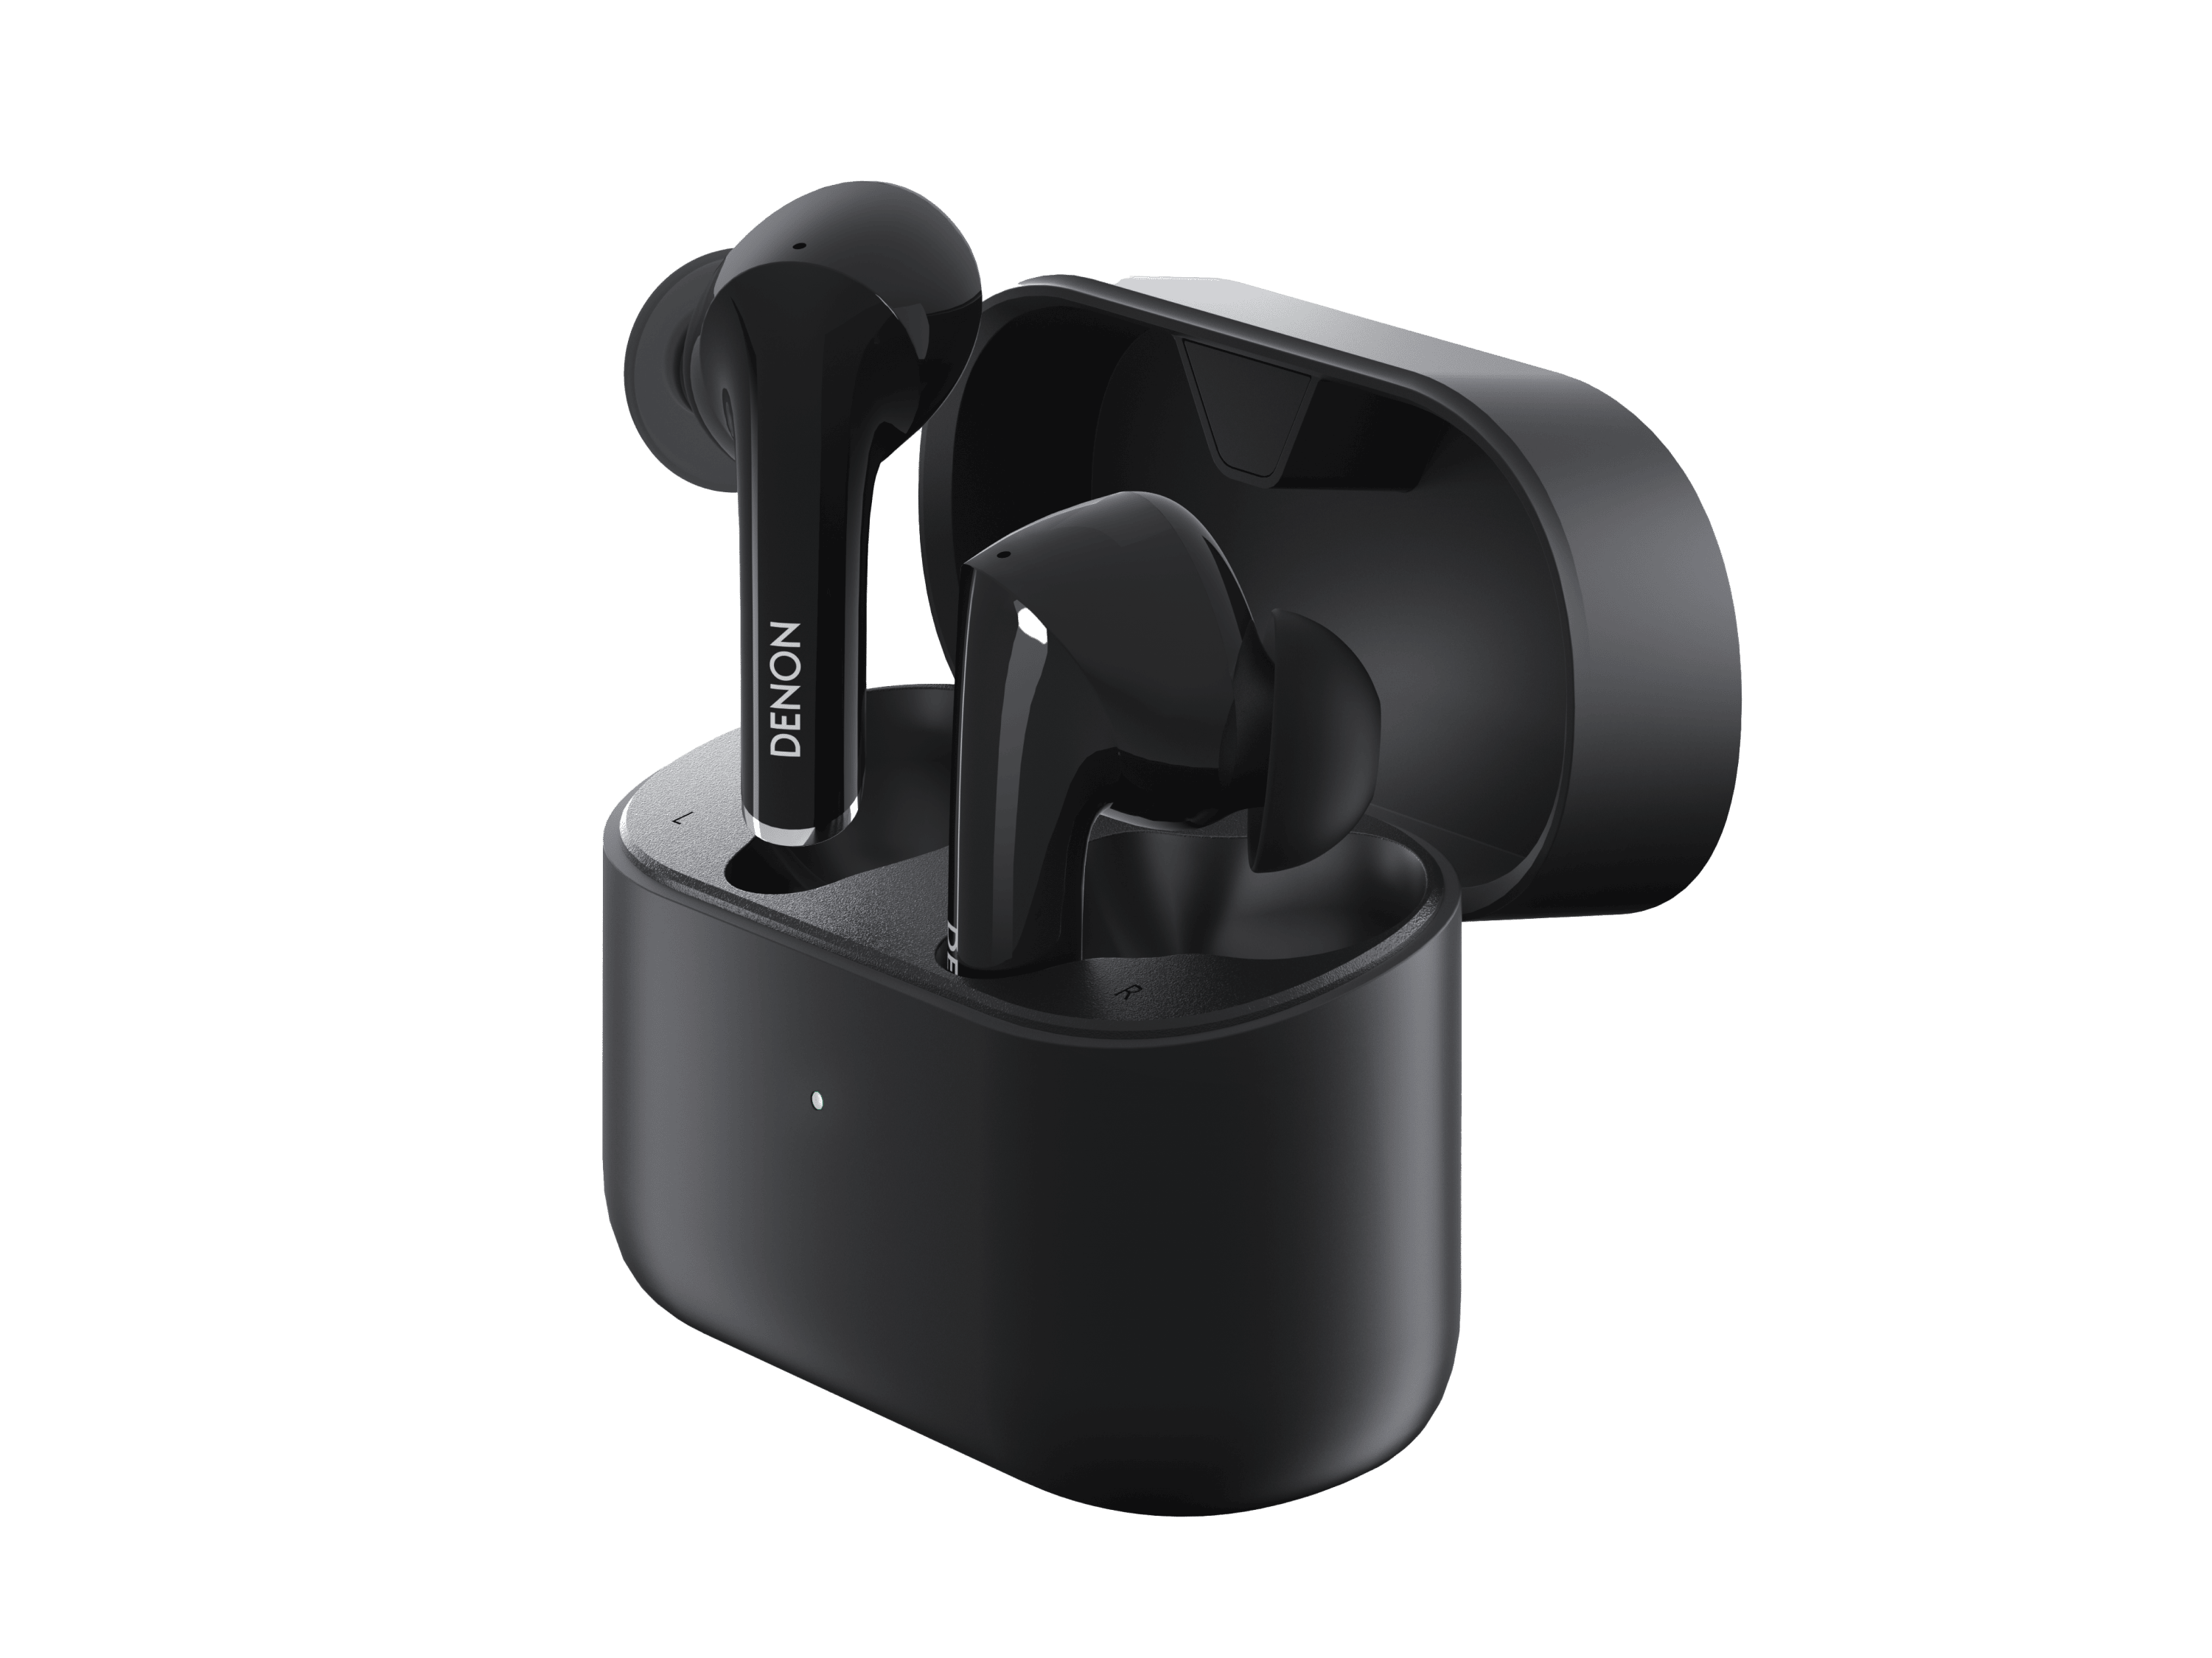 Denon Noise Cancelling Earbuds